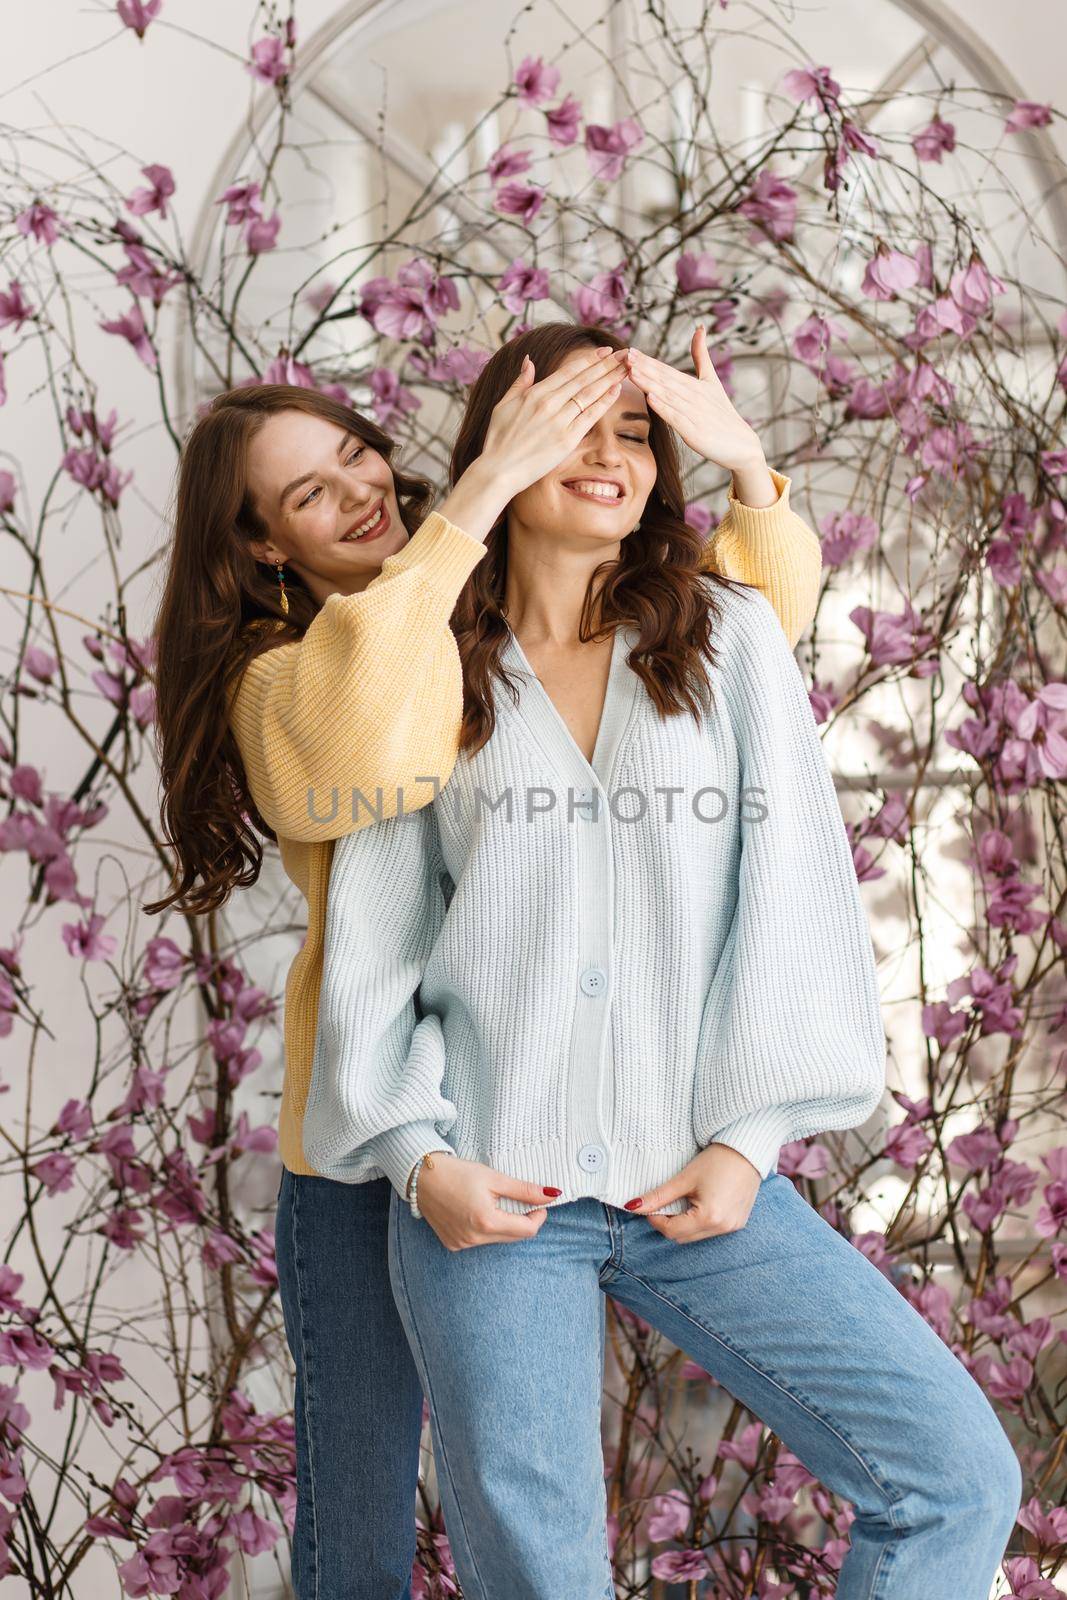 Two girls, models, have fun and smile in a photo studio.